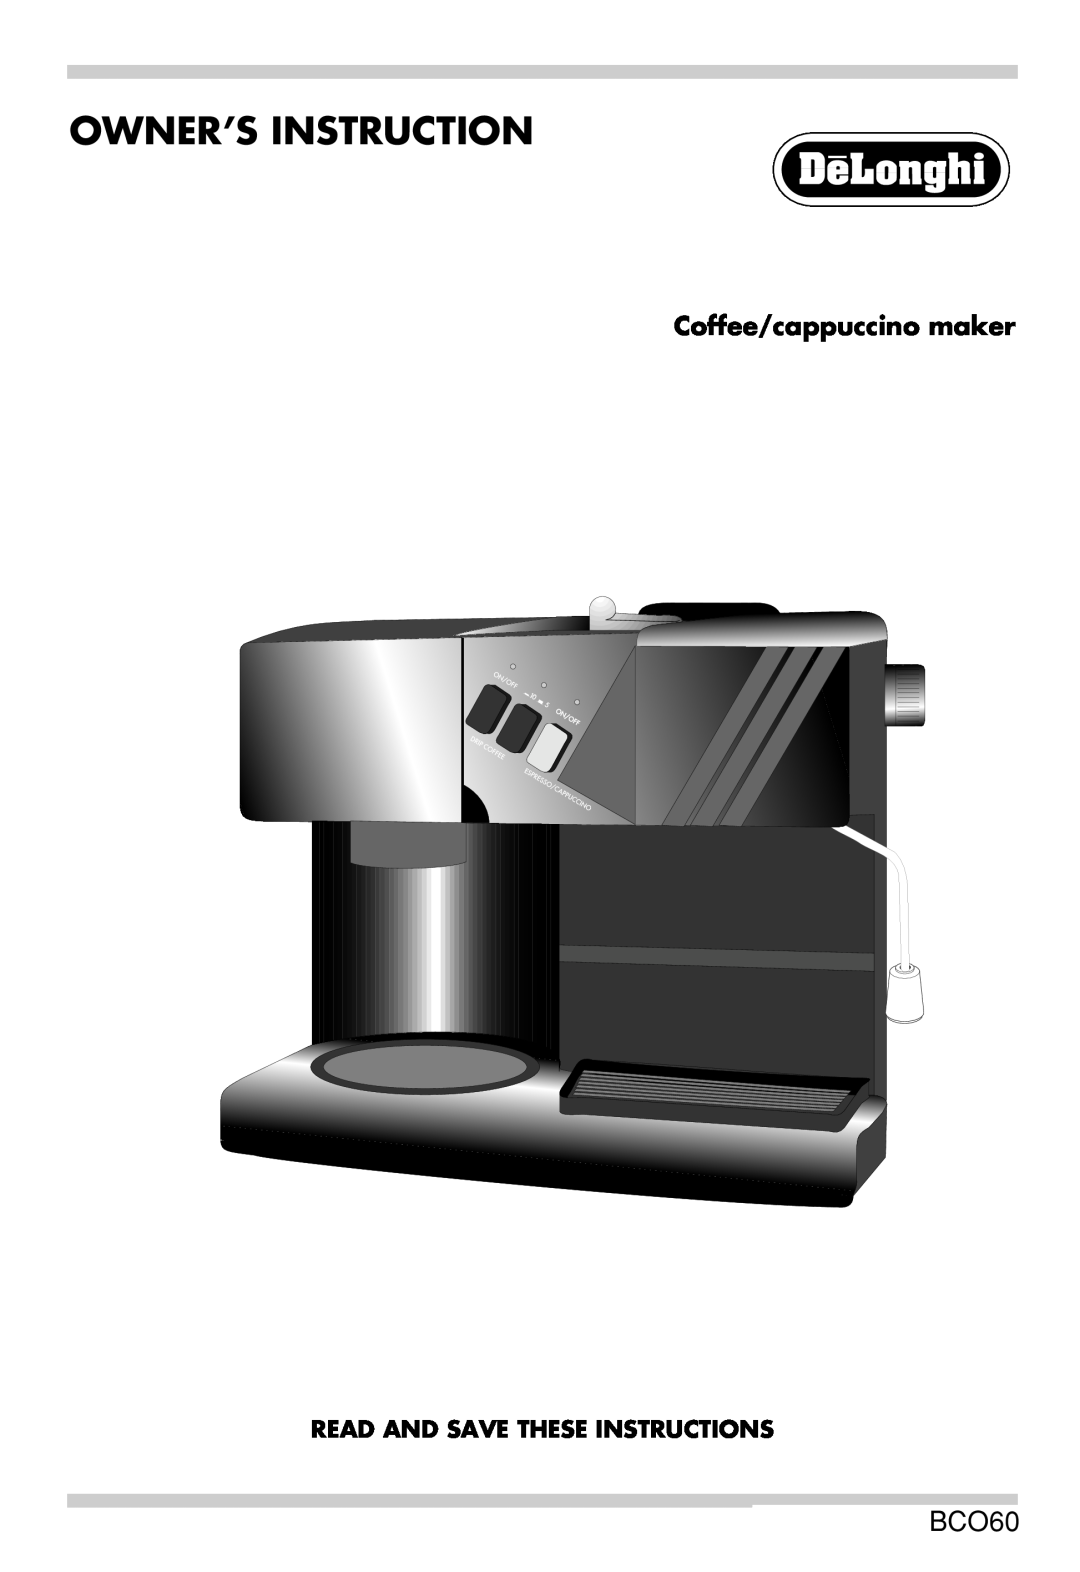 DeLonghi BCO60 manual Owner’S Instruction, Coffee/cappuccino maker, Read And Save These Instructions 